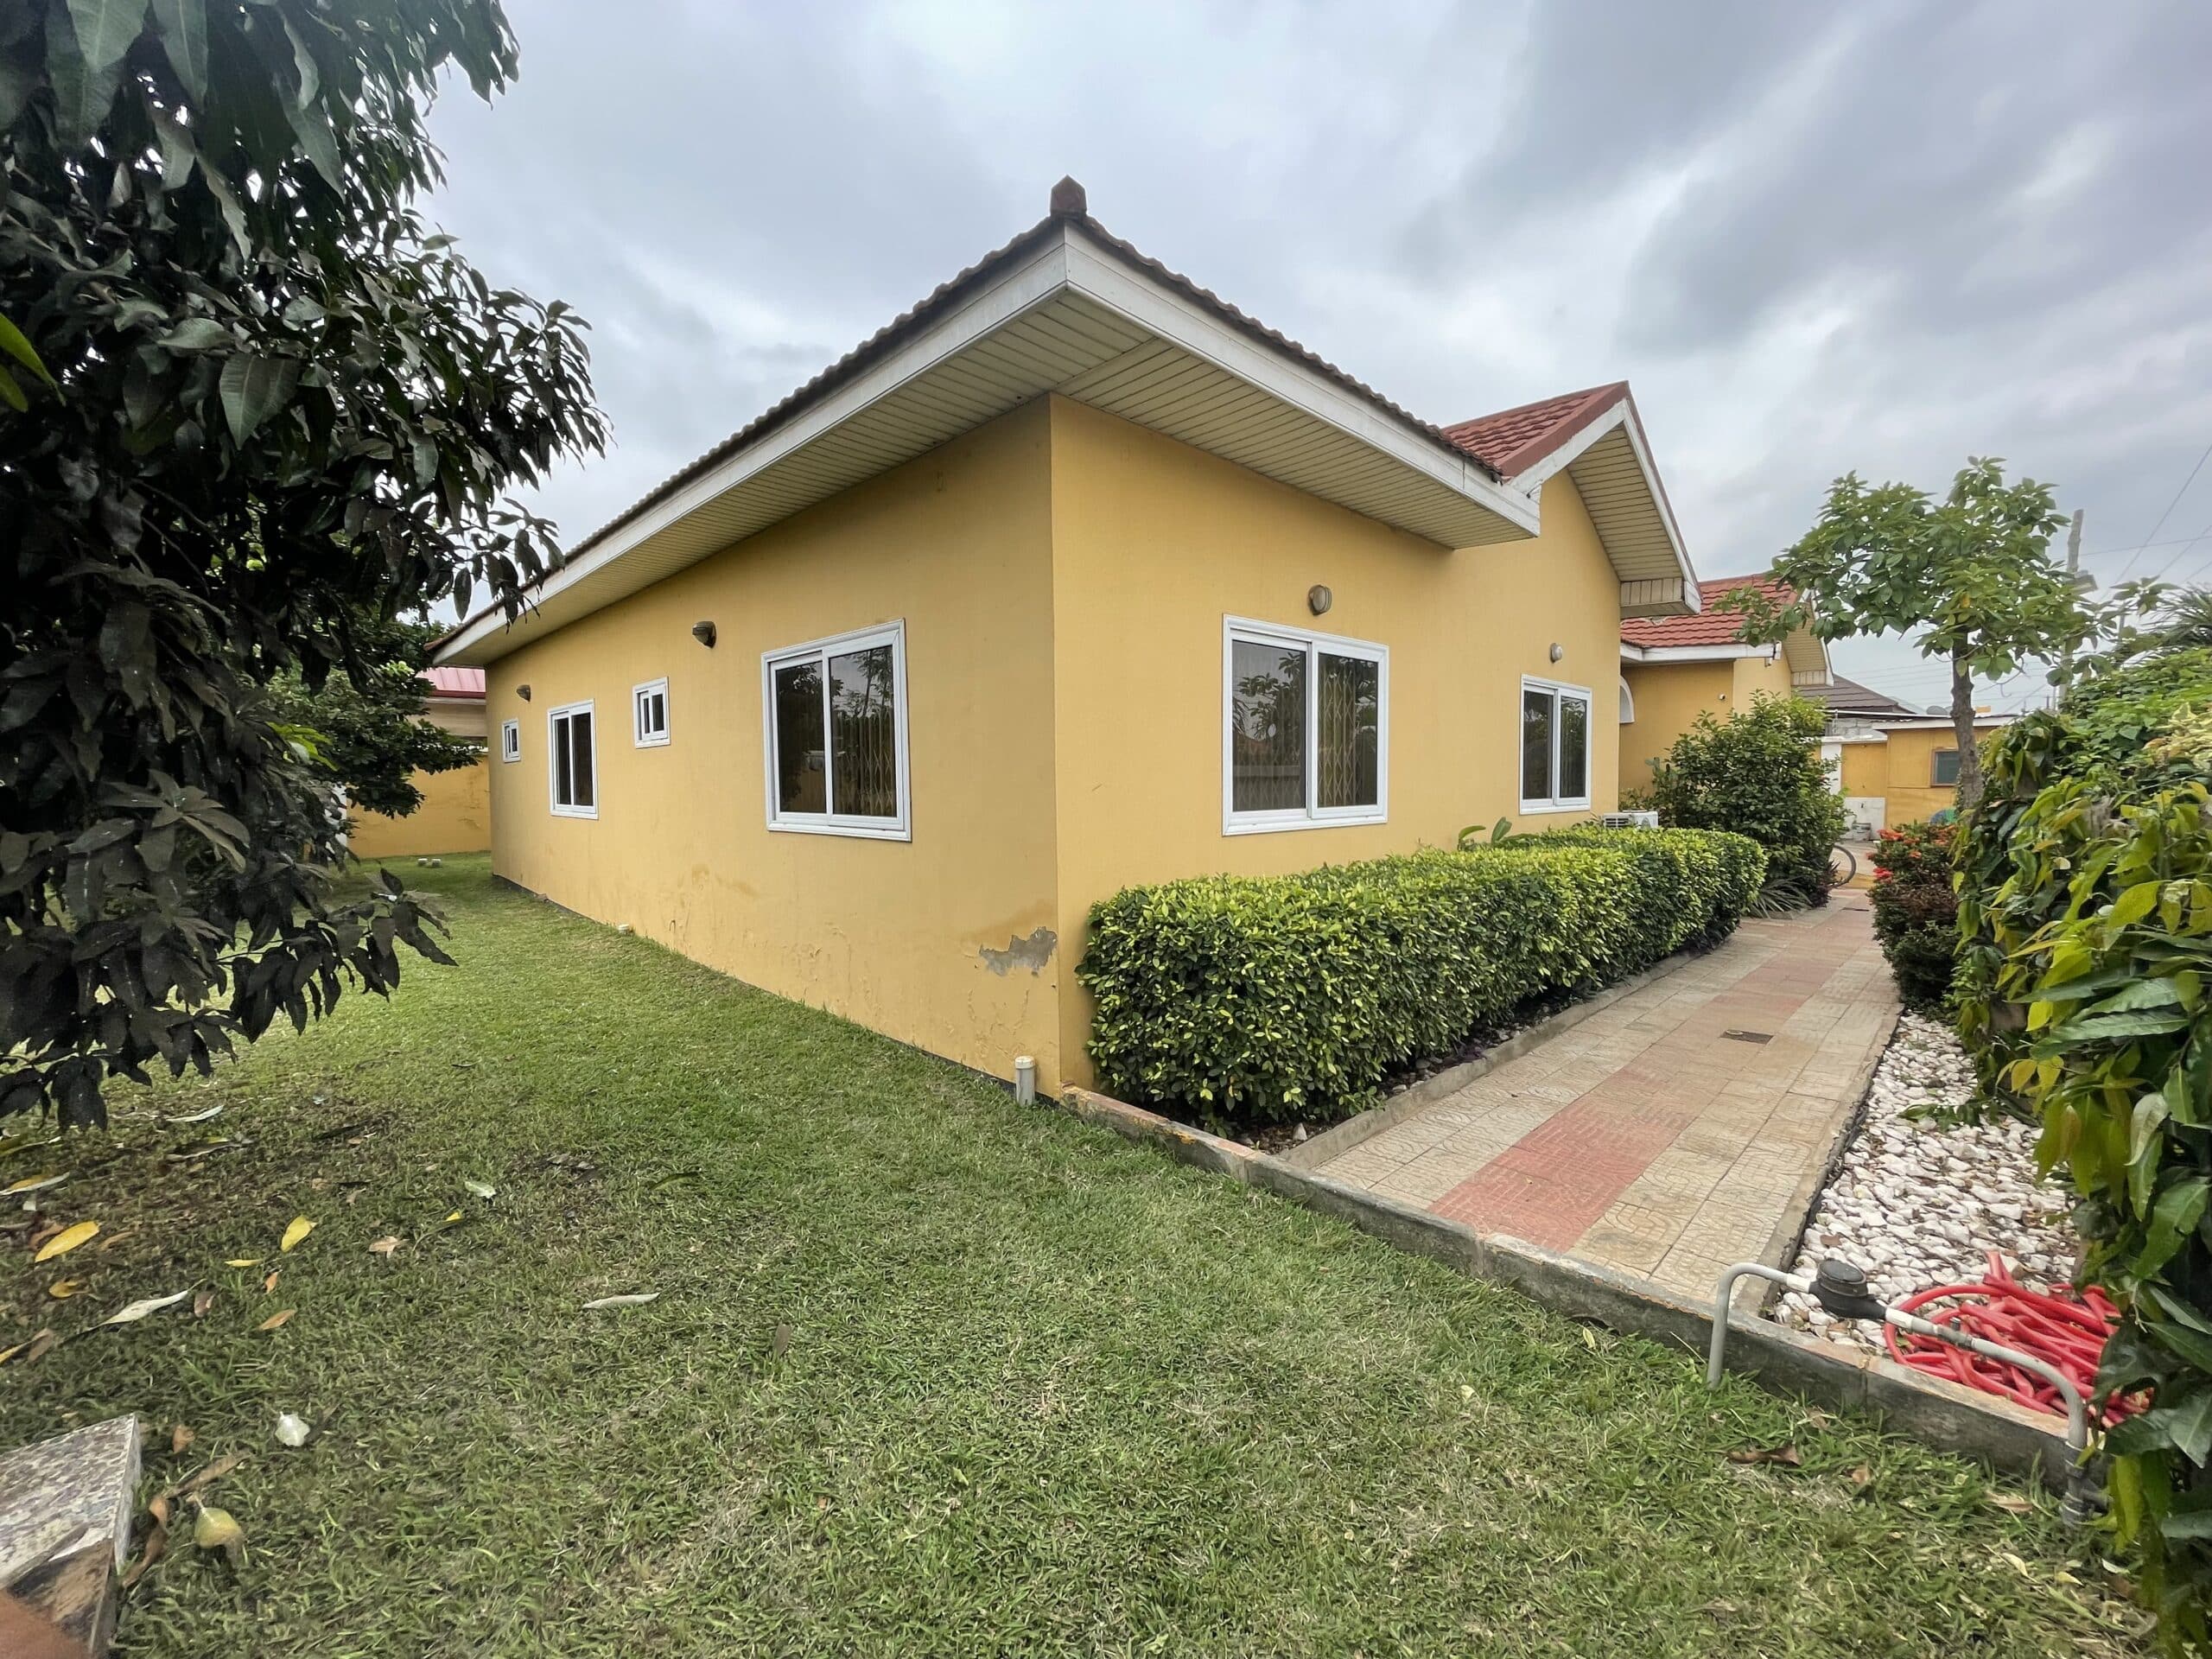 4 bedroom house for sale at Tema Community 25